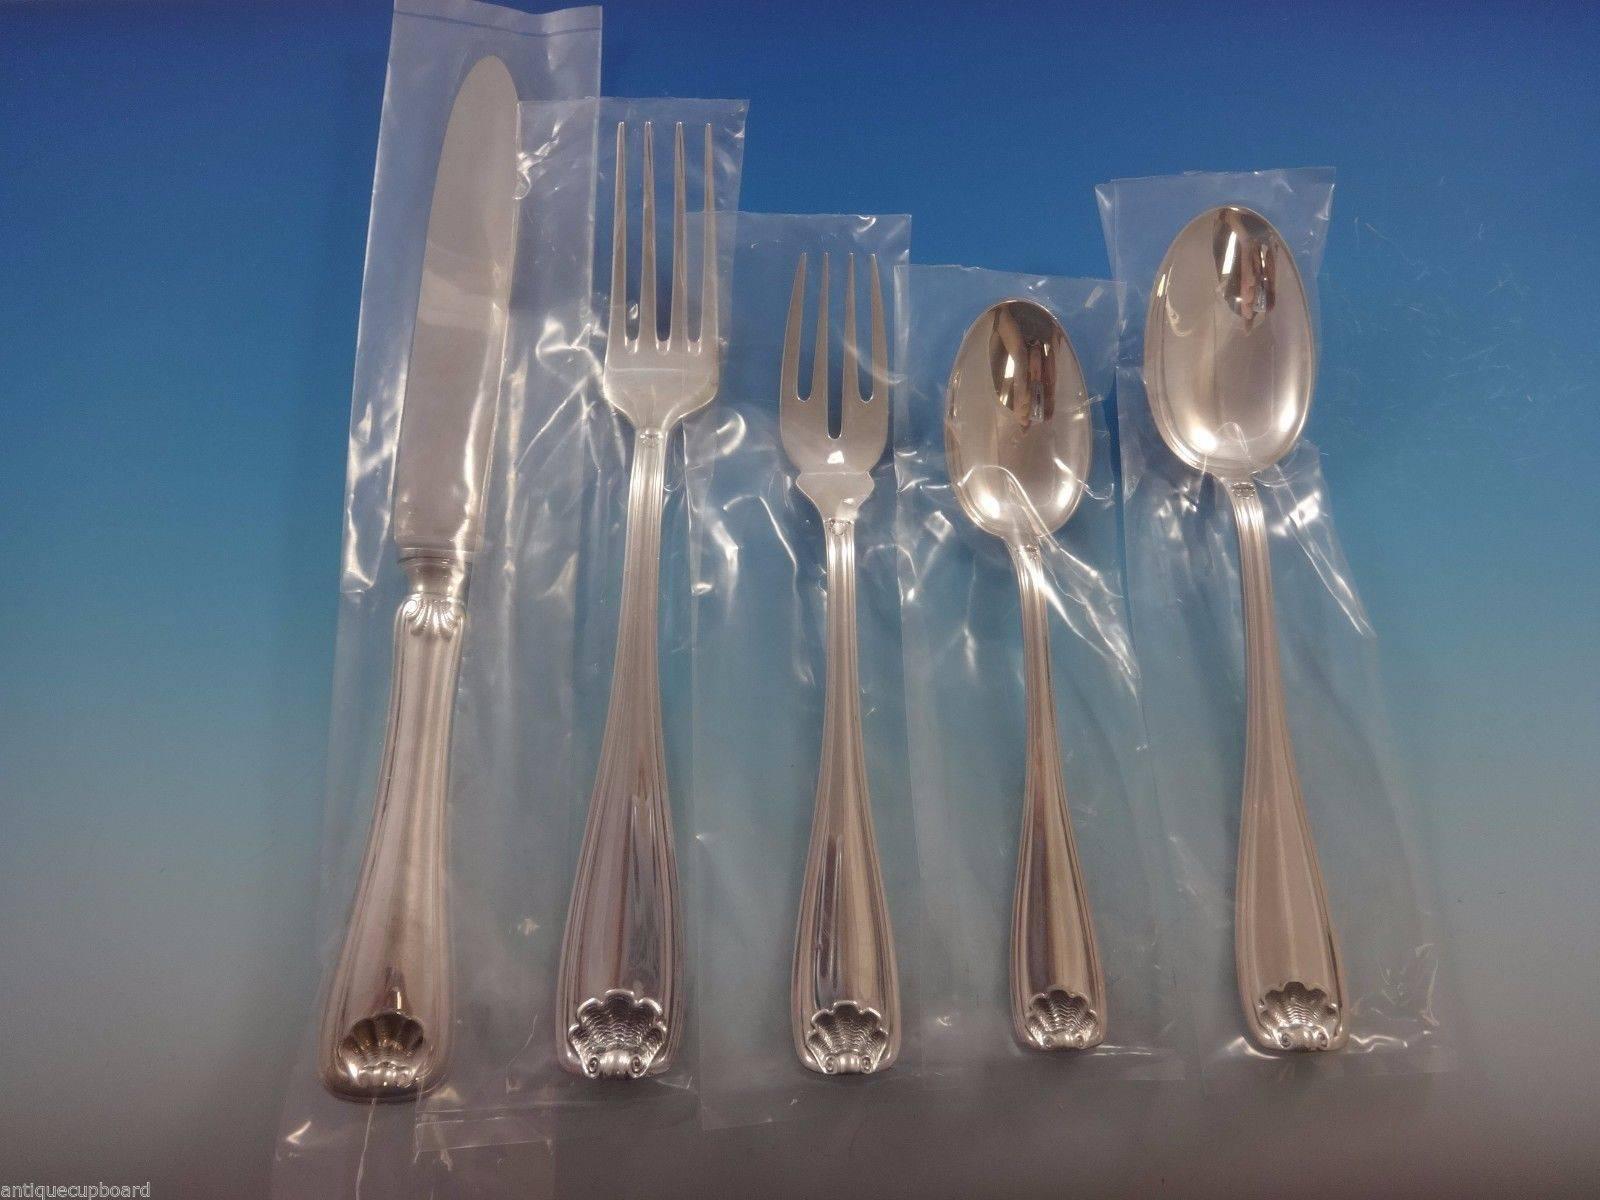 This exceptional 77 piece dinner size sterling silver Cellini by (Ricci) Fortunoff set includes:

12 dinner size knives, 9 1/2